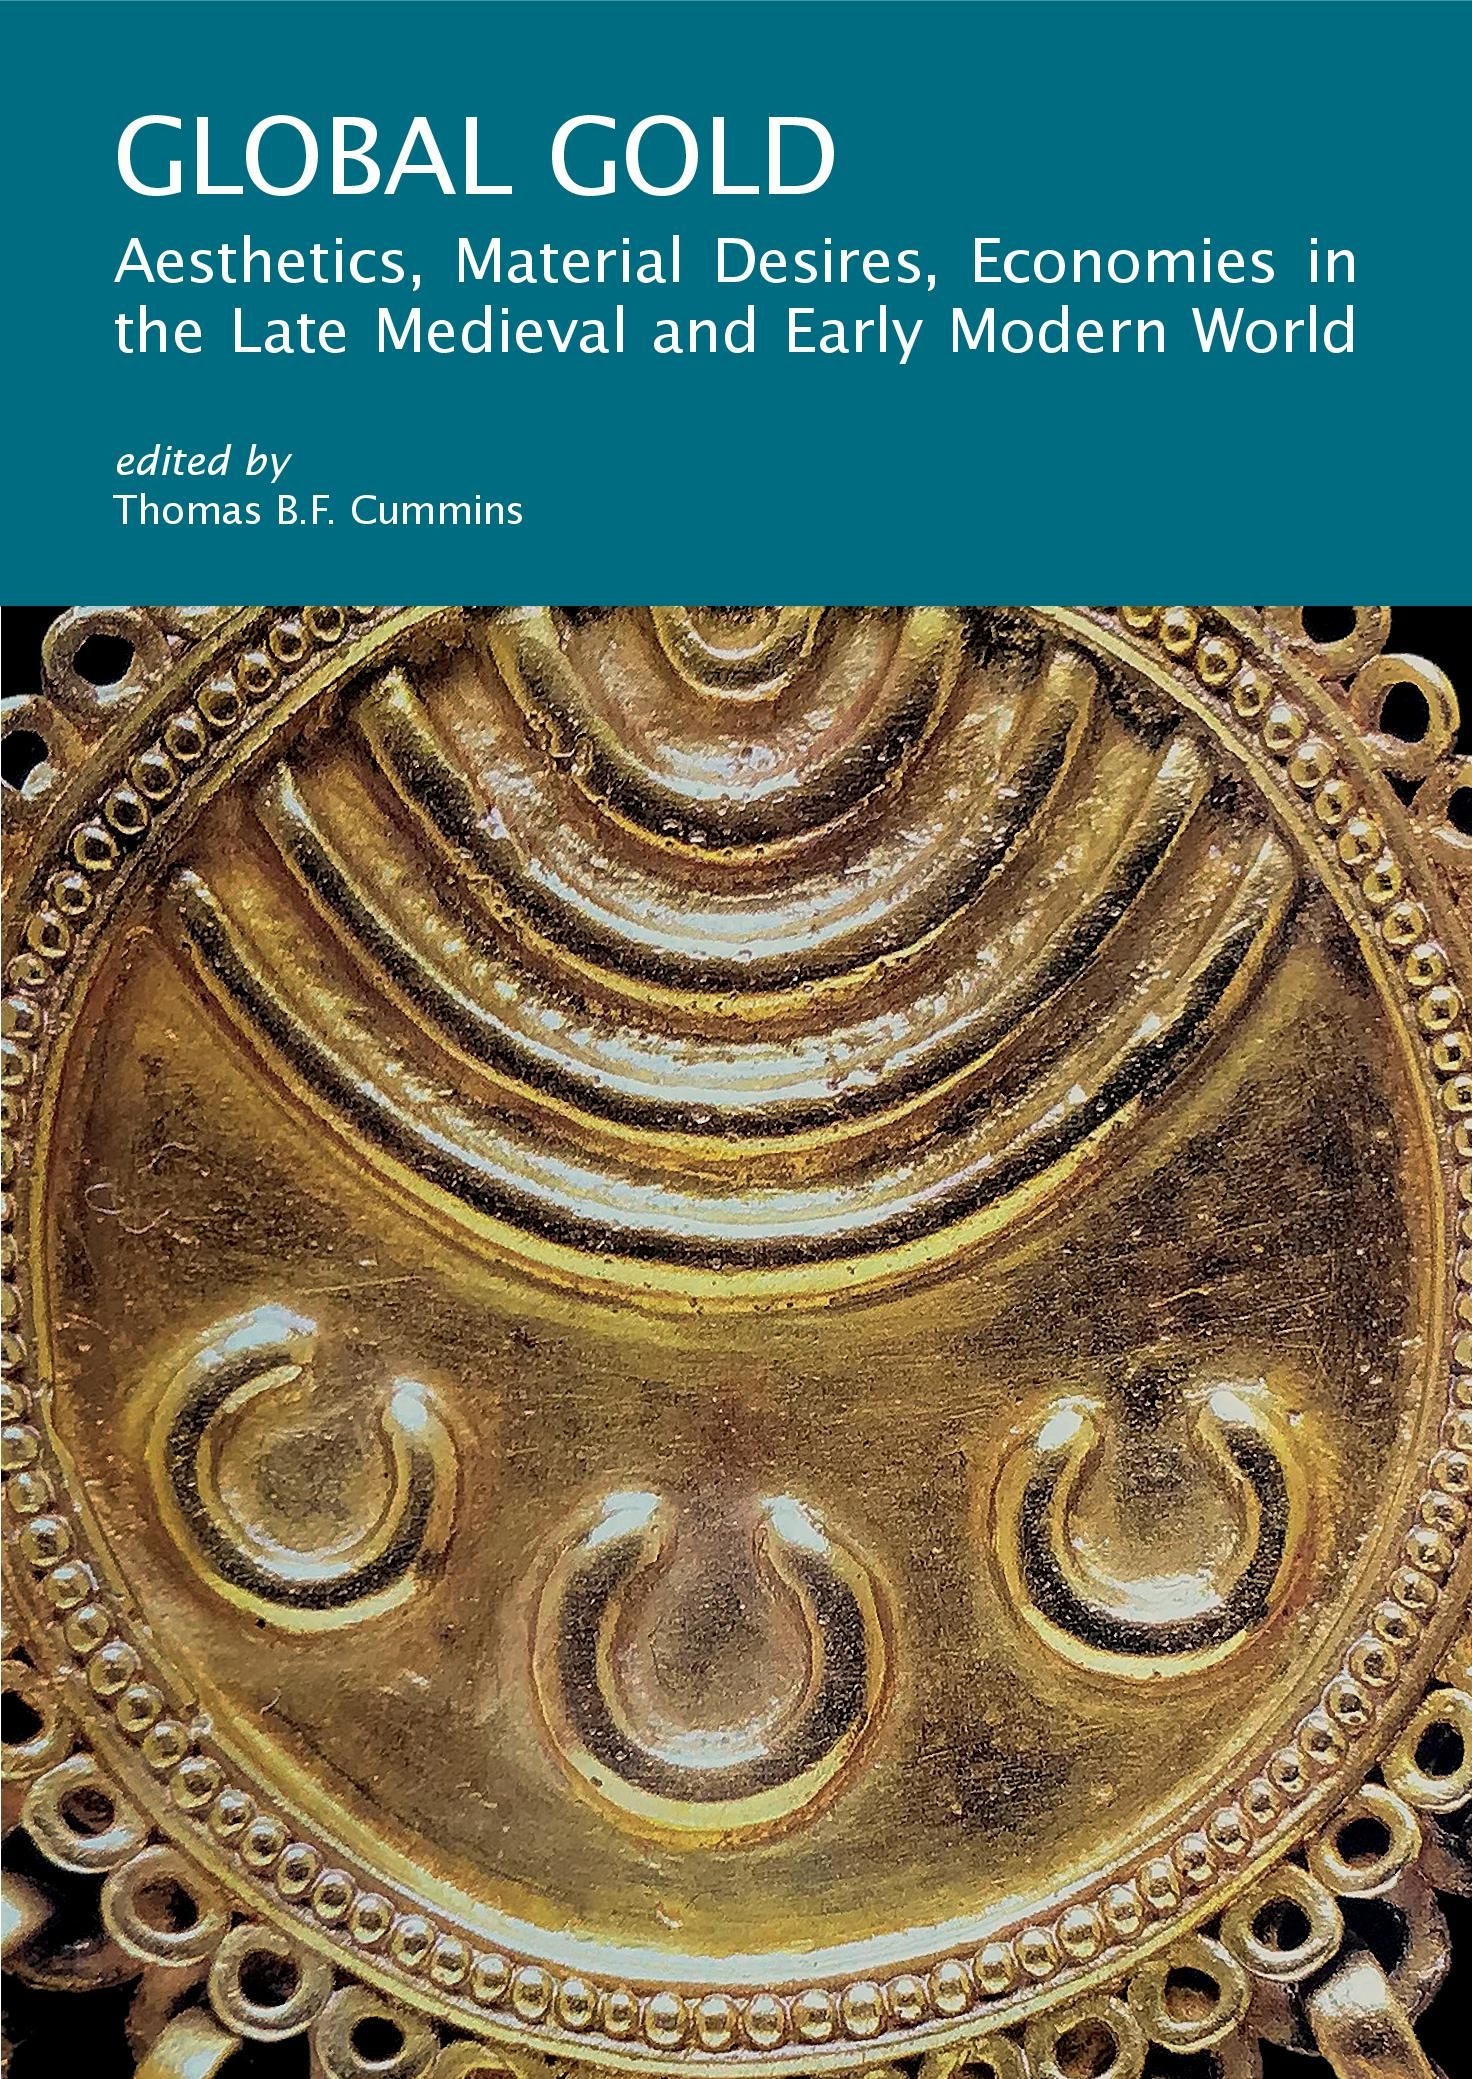 Global Gold: Aesthetics, Material Desires, Economies in the Late Medieval and Early Modern World